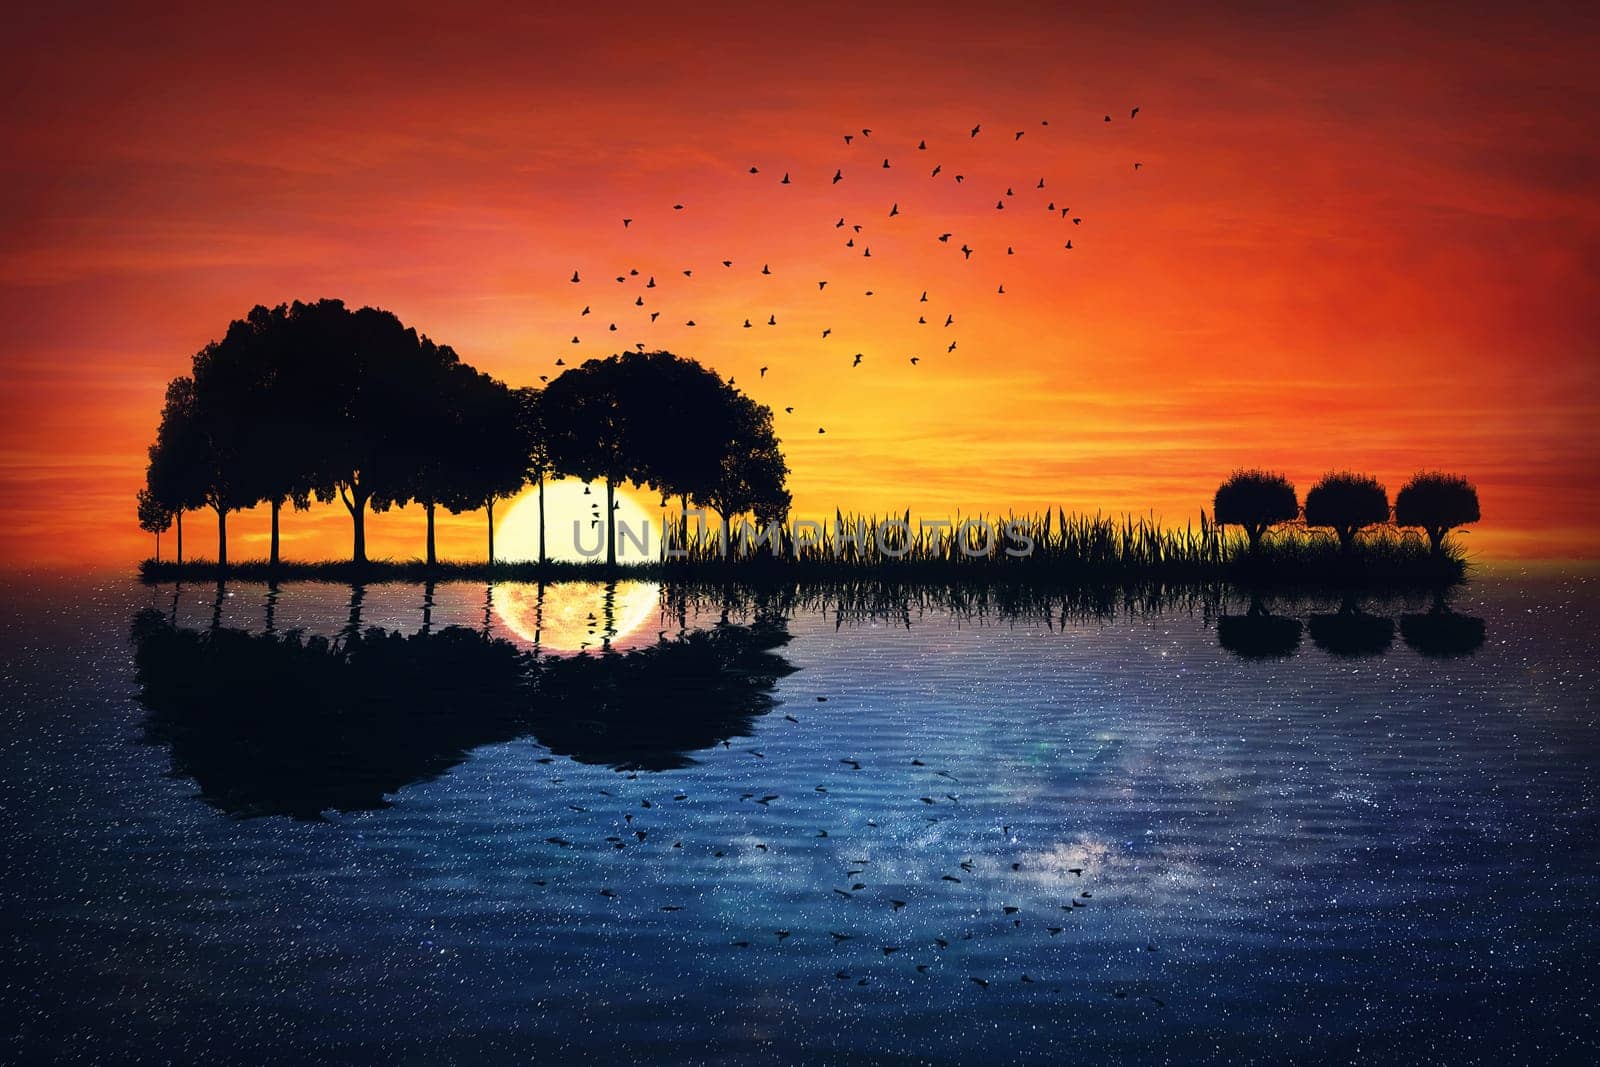 Guitar island surreal seascape, day reflecting into night, sunset against starry sky background. Magical scene with trees on an isle grow in shape of a music instrument with reflection in the water